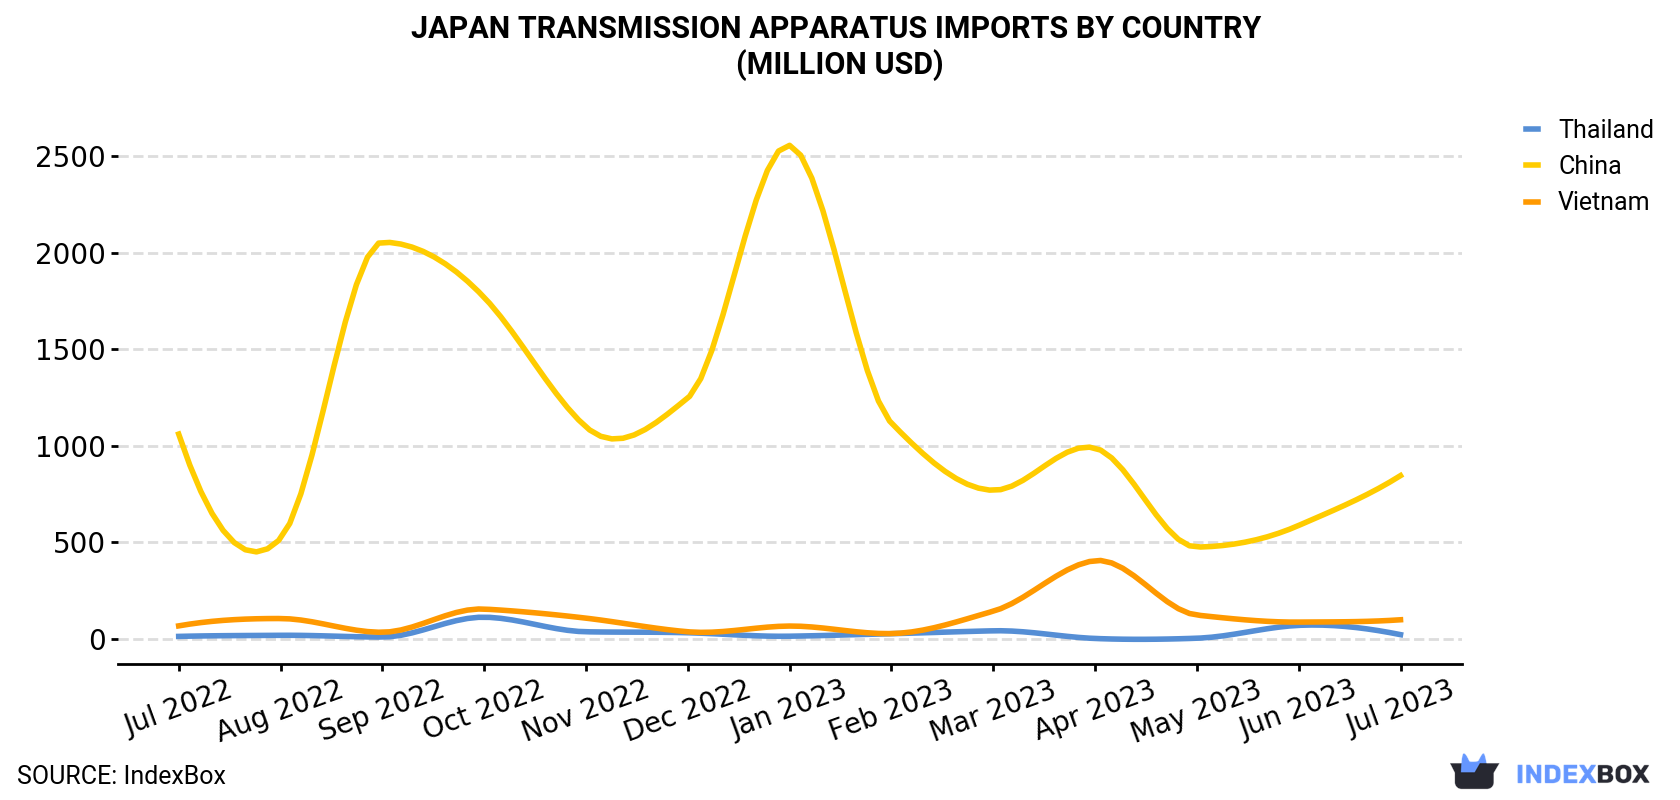 Japan Transmission Apparatus Imports By Country (Million USD)